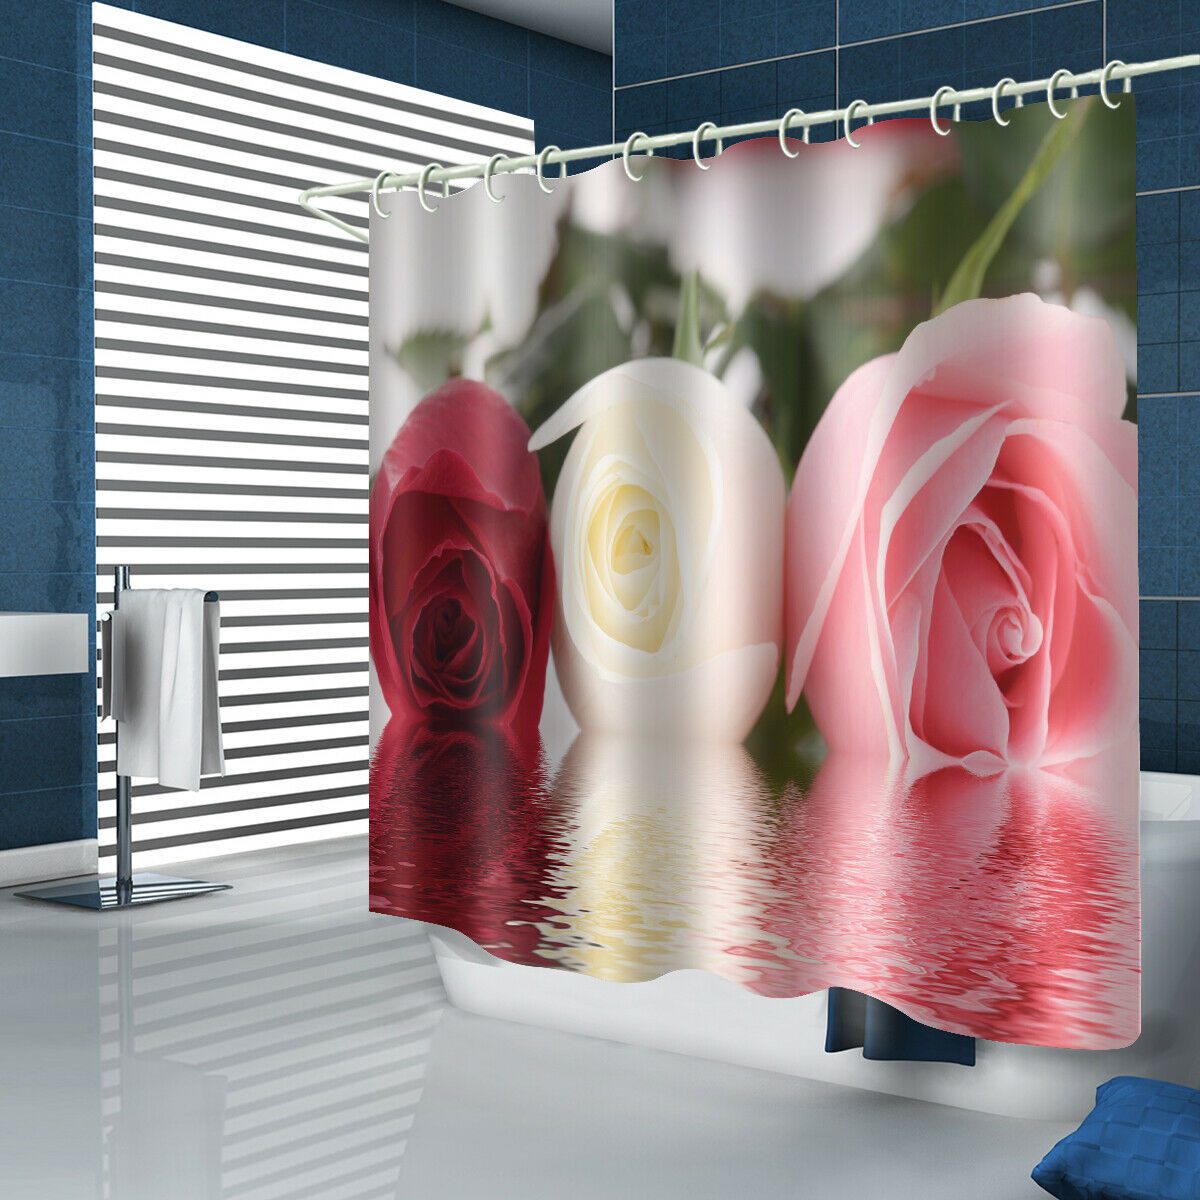 Three Roses Shower Curtain Bathroom Rug Set Bath Mat Non-Slip Toilet Lid Cover-180×180cm Shower Curtain Only-Free Shipping at meselling99